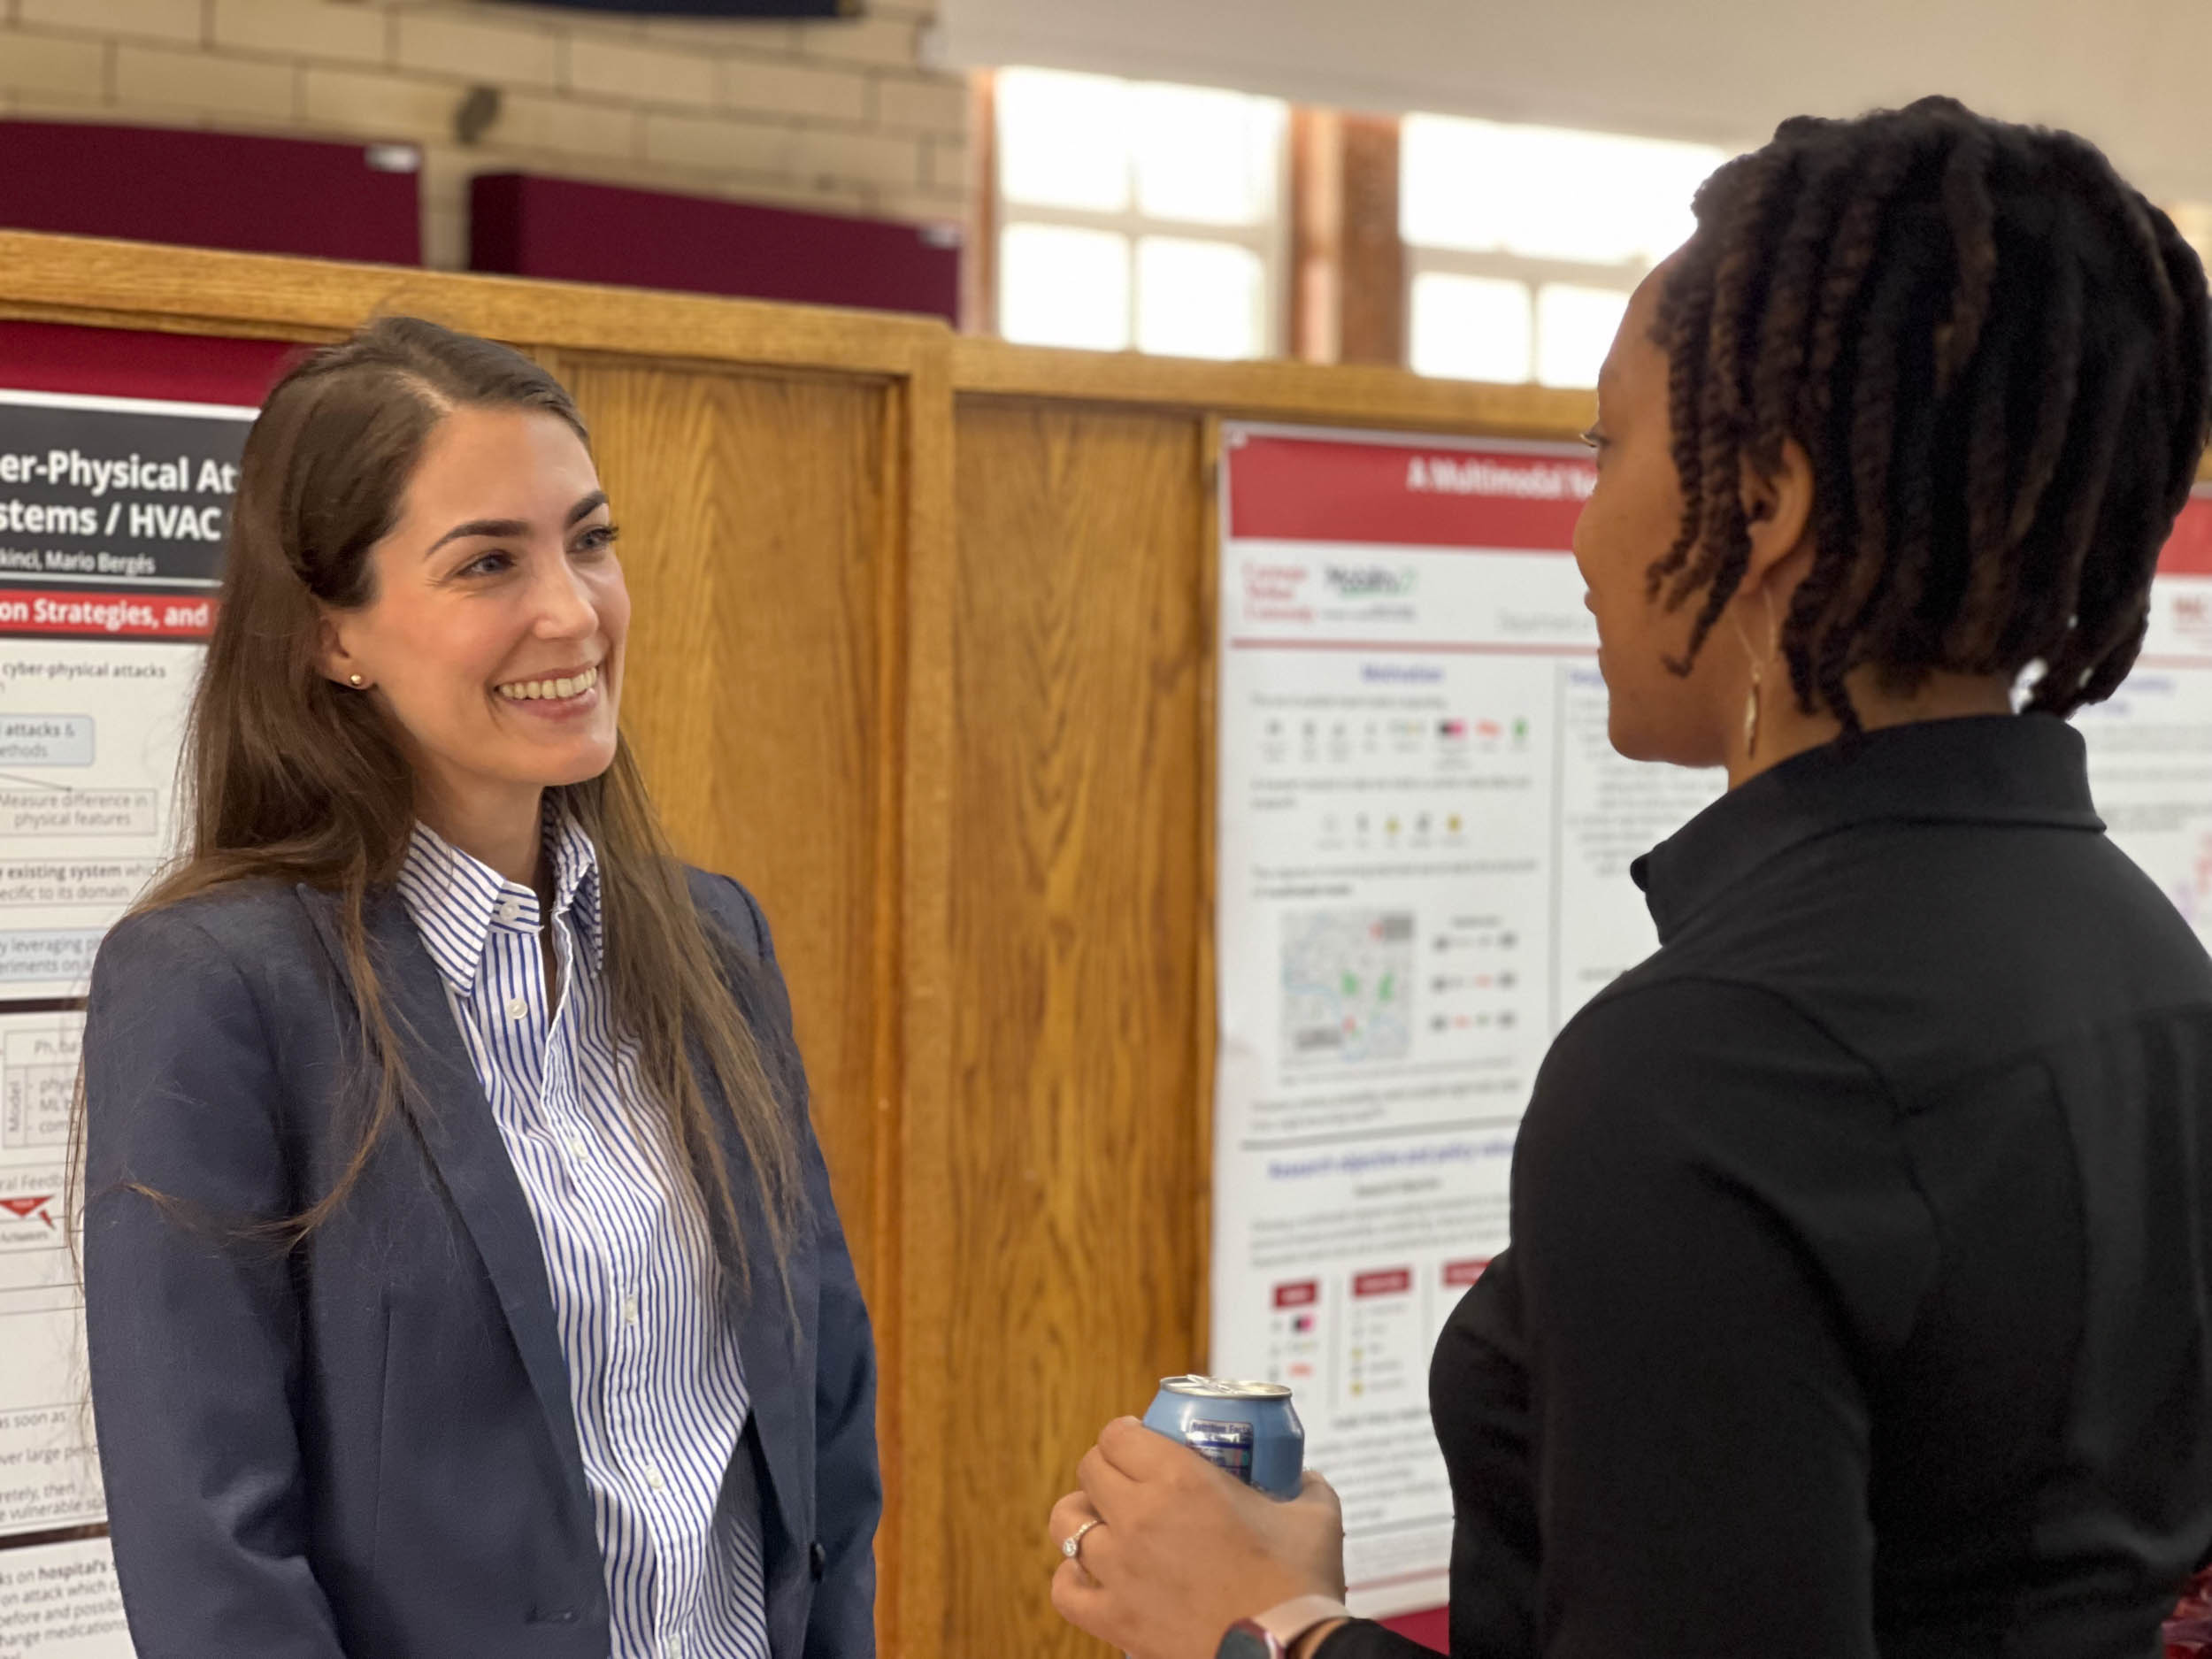 Professor Destenie Nock chats with guest at poster session